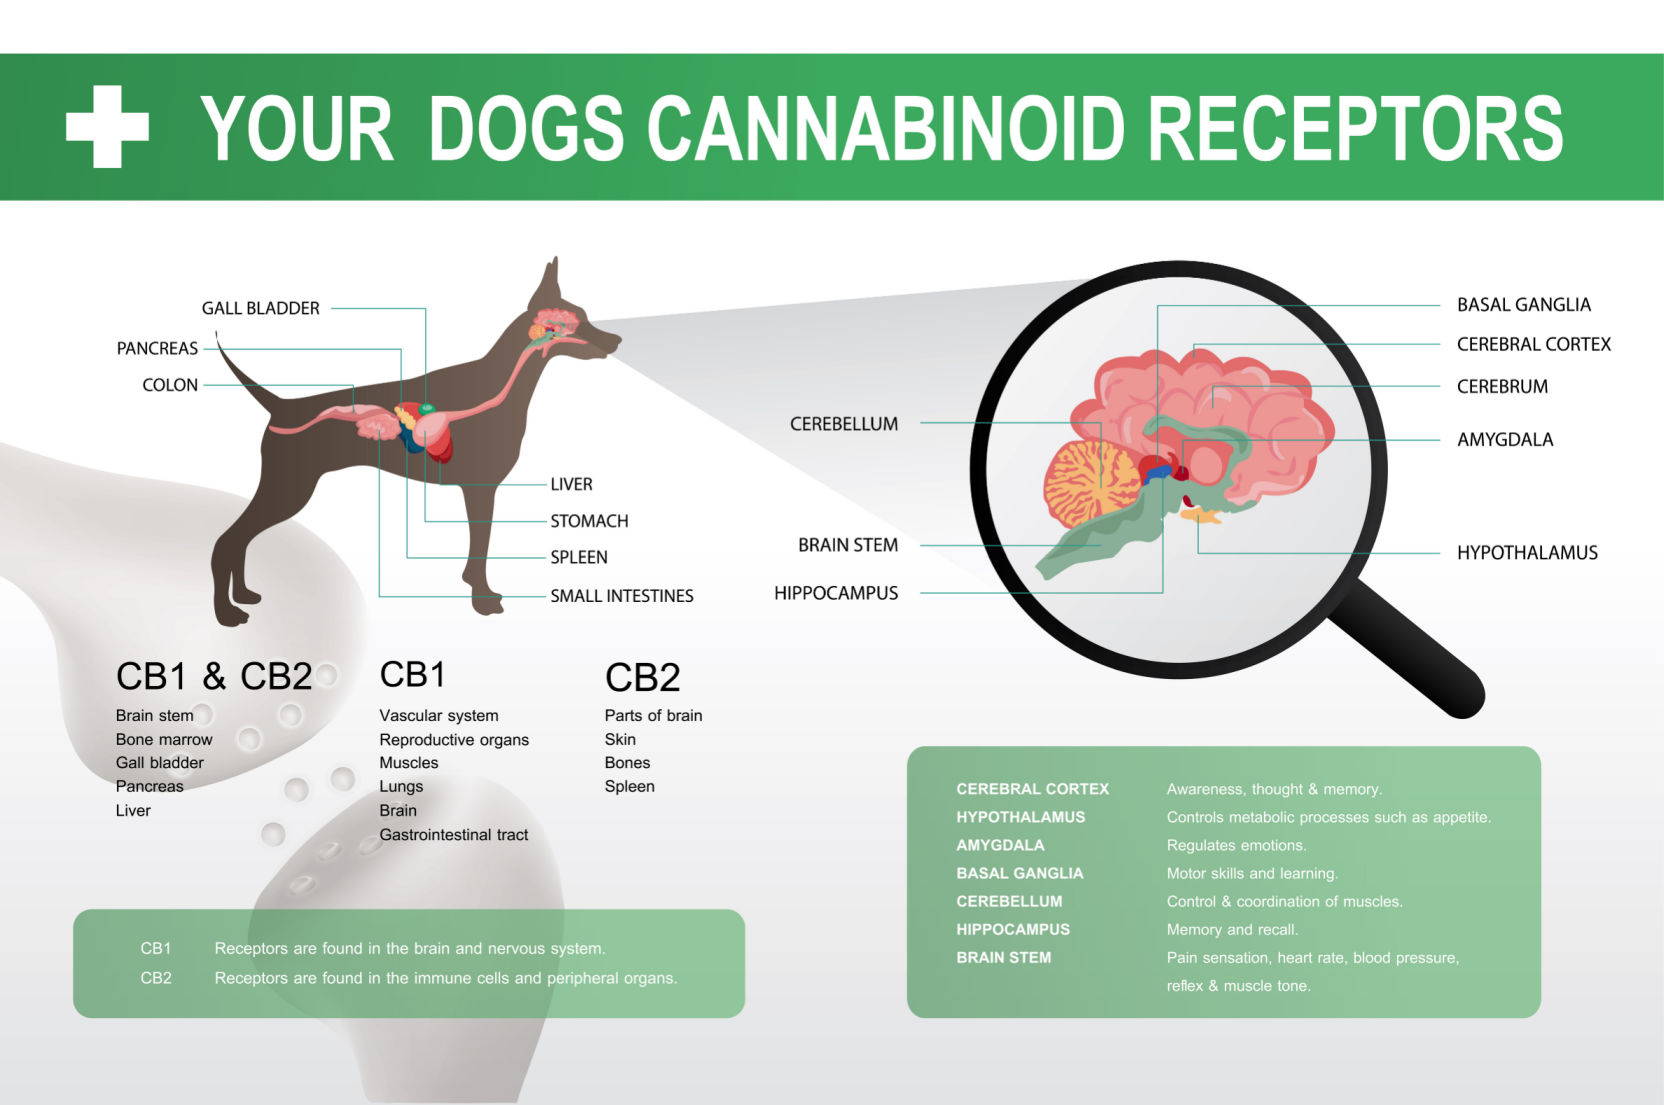 CBD canine receptors associated with separation anxiety help reduce anxiety and improve behavior.